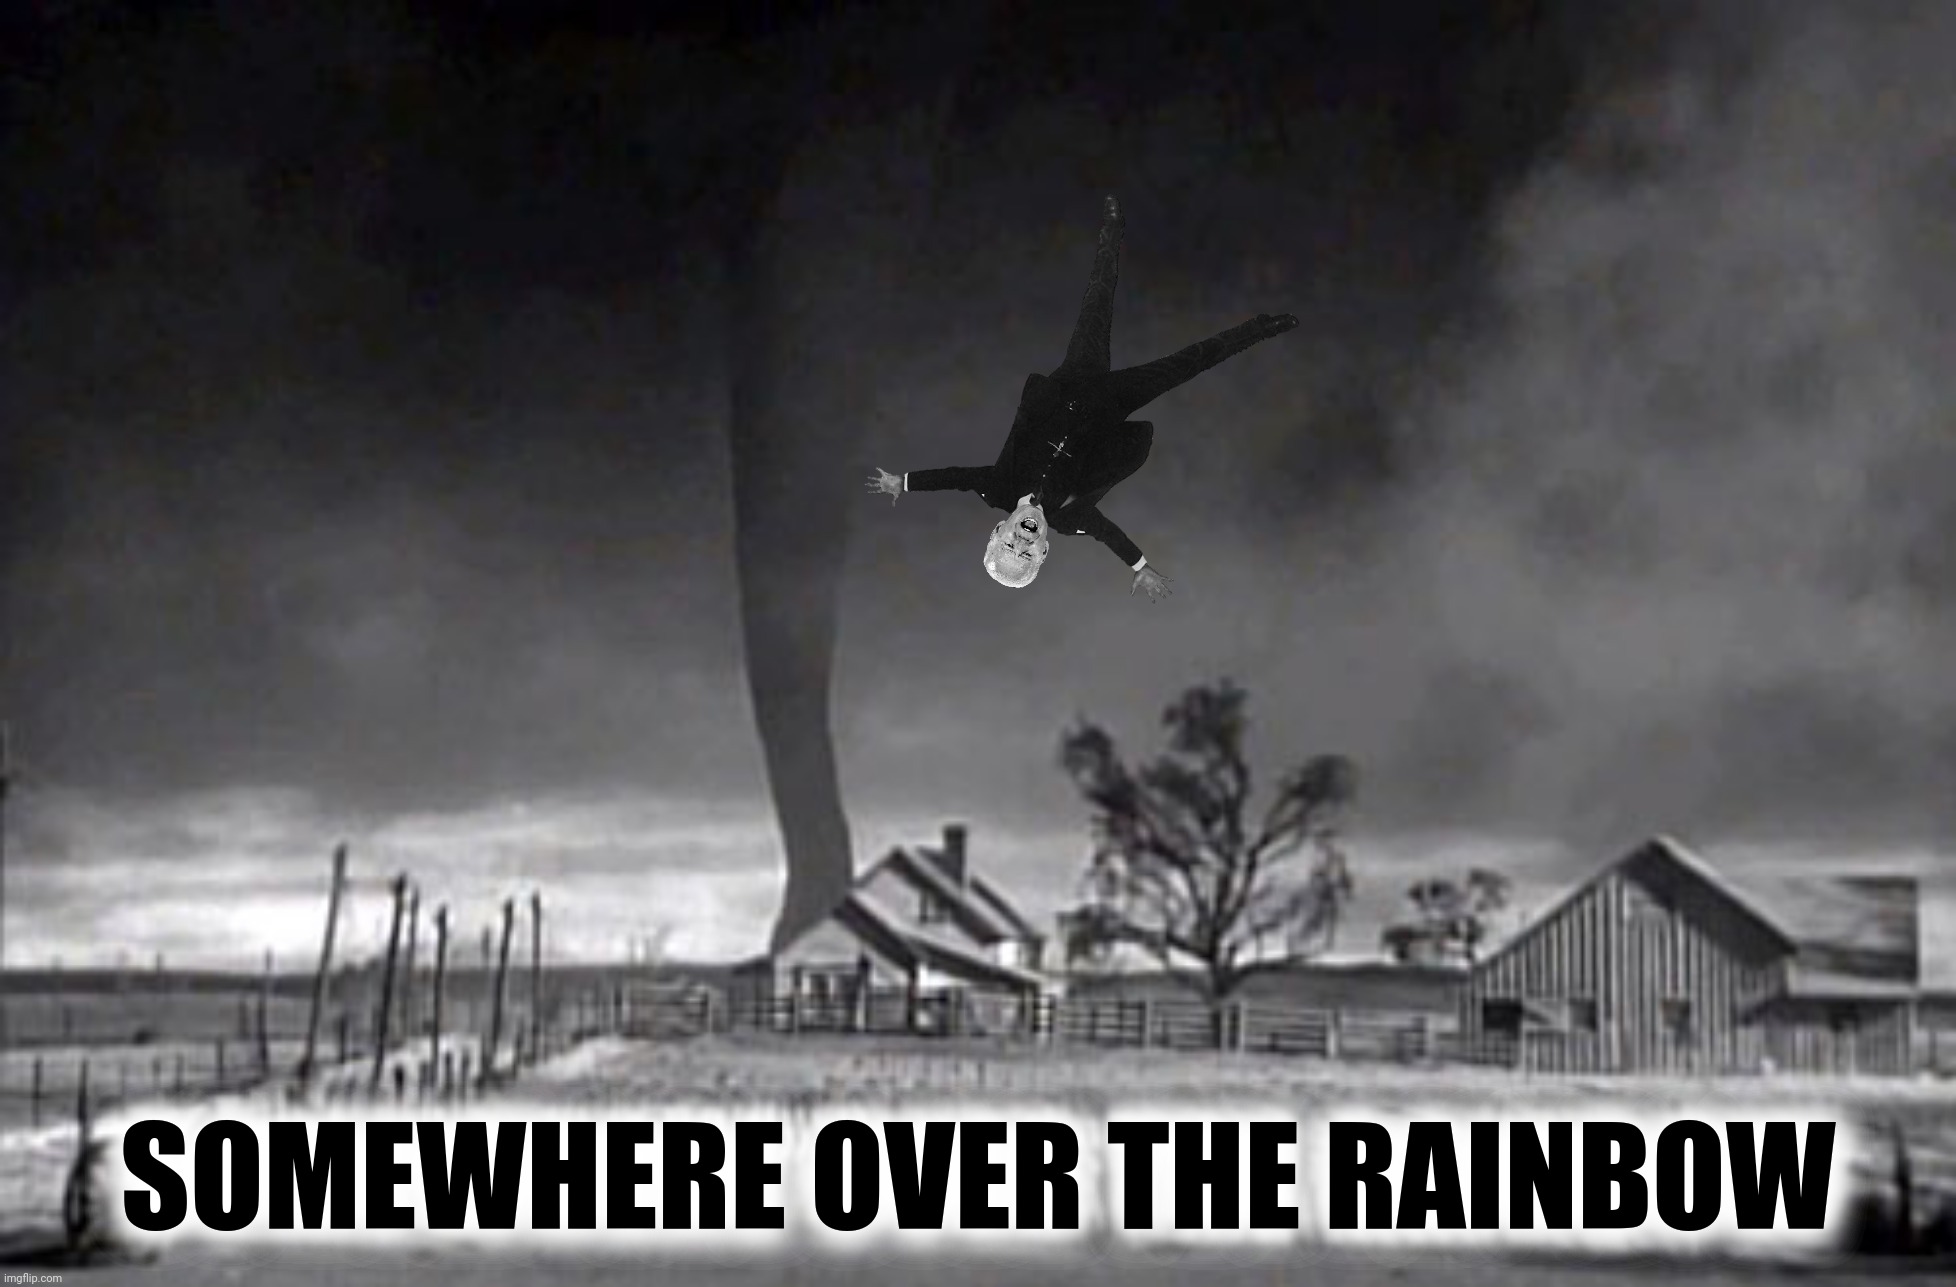 All he is is dust in the wind | SOMEWHERE OVER THE RAINBOW | image tagged in bad photoshop,joe biden,wizard of oz,dust in the wind | made w/ Imgflip meme maker